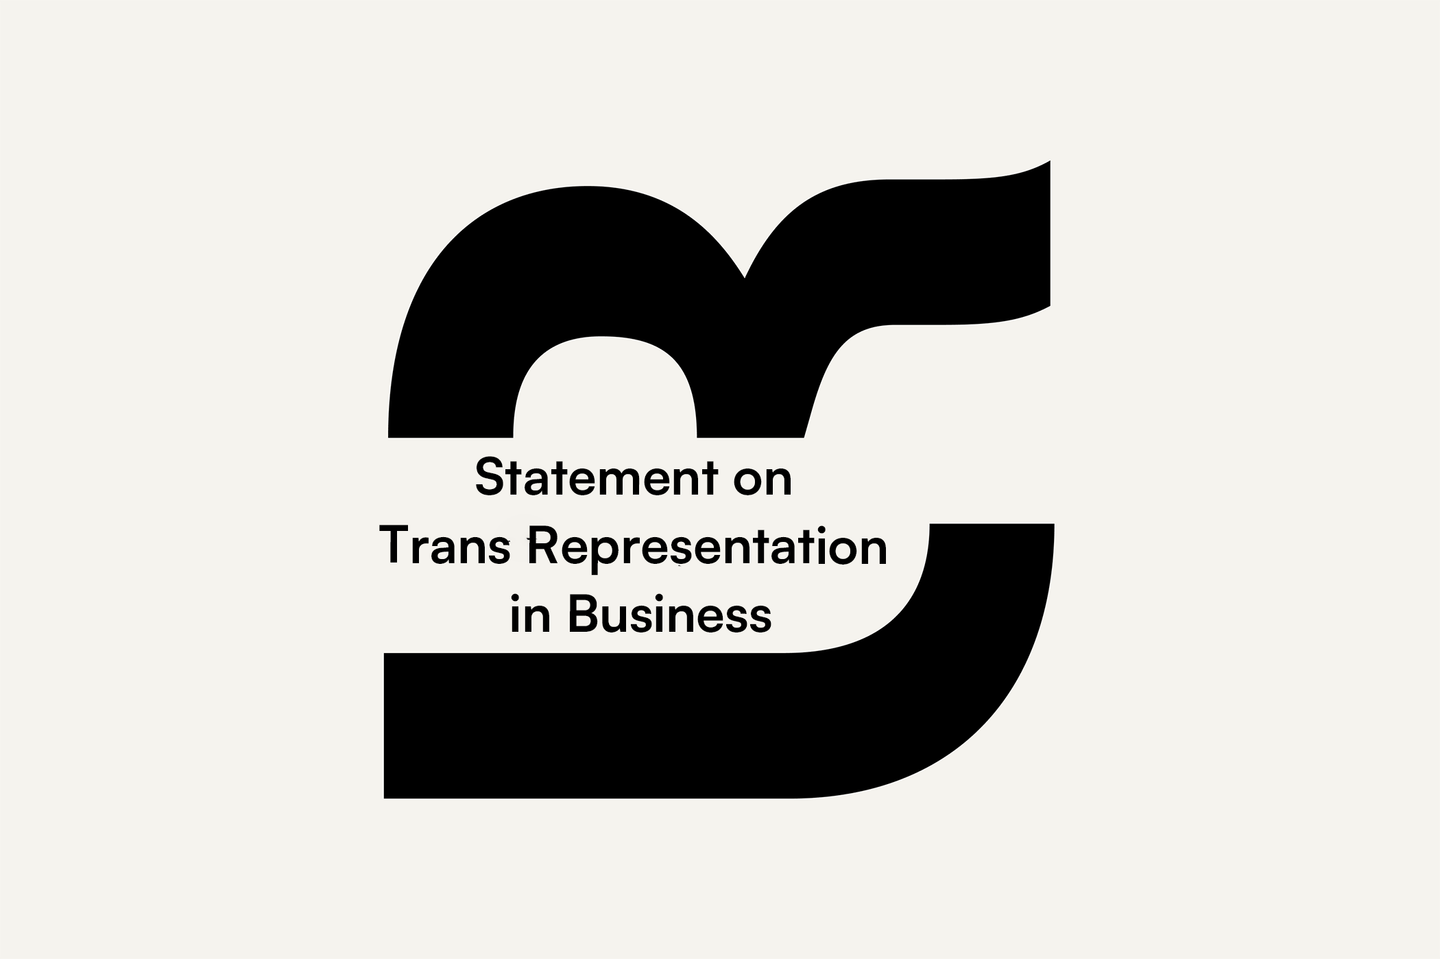 Statement on Trans Representation in Business